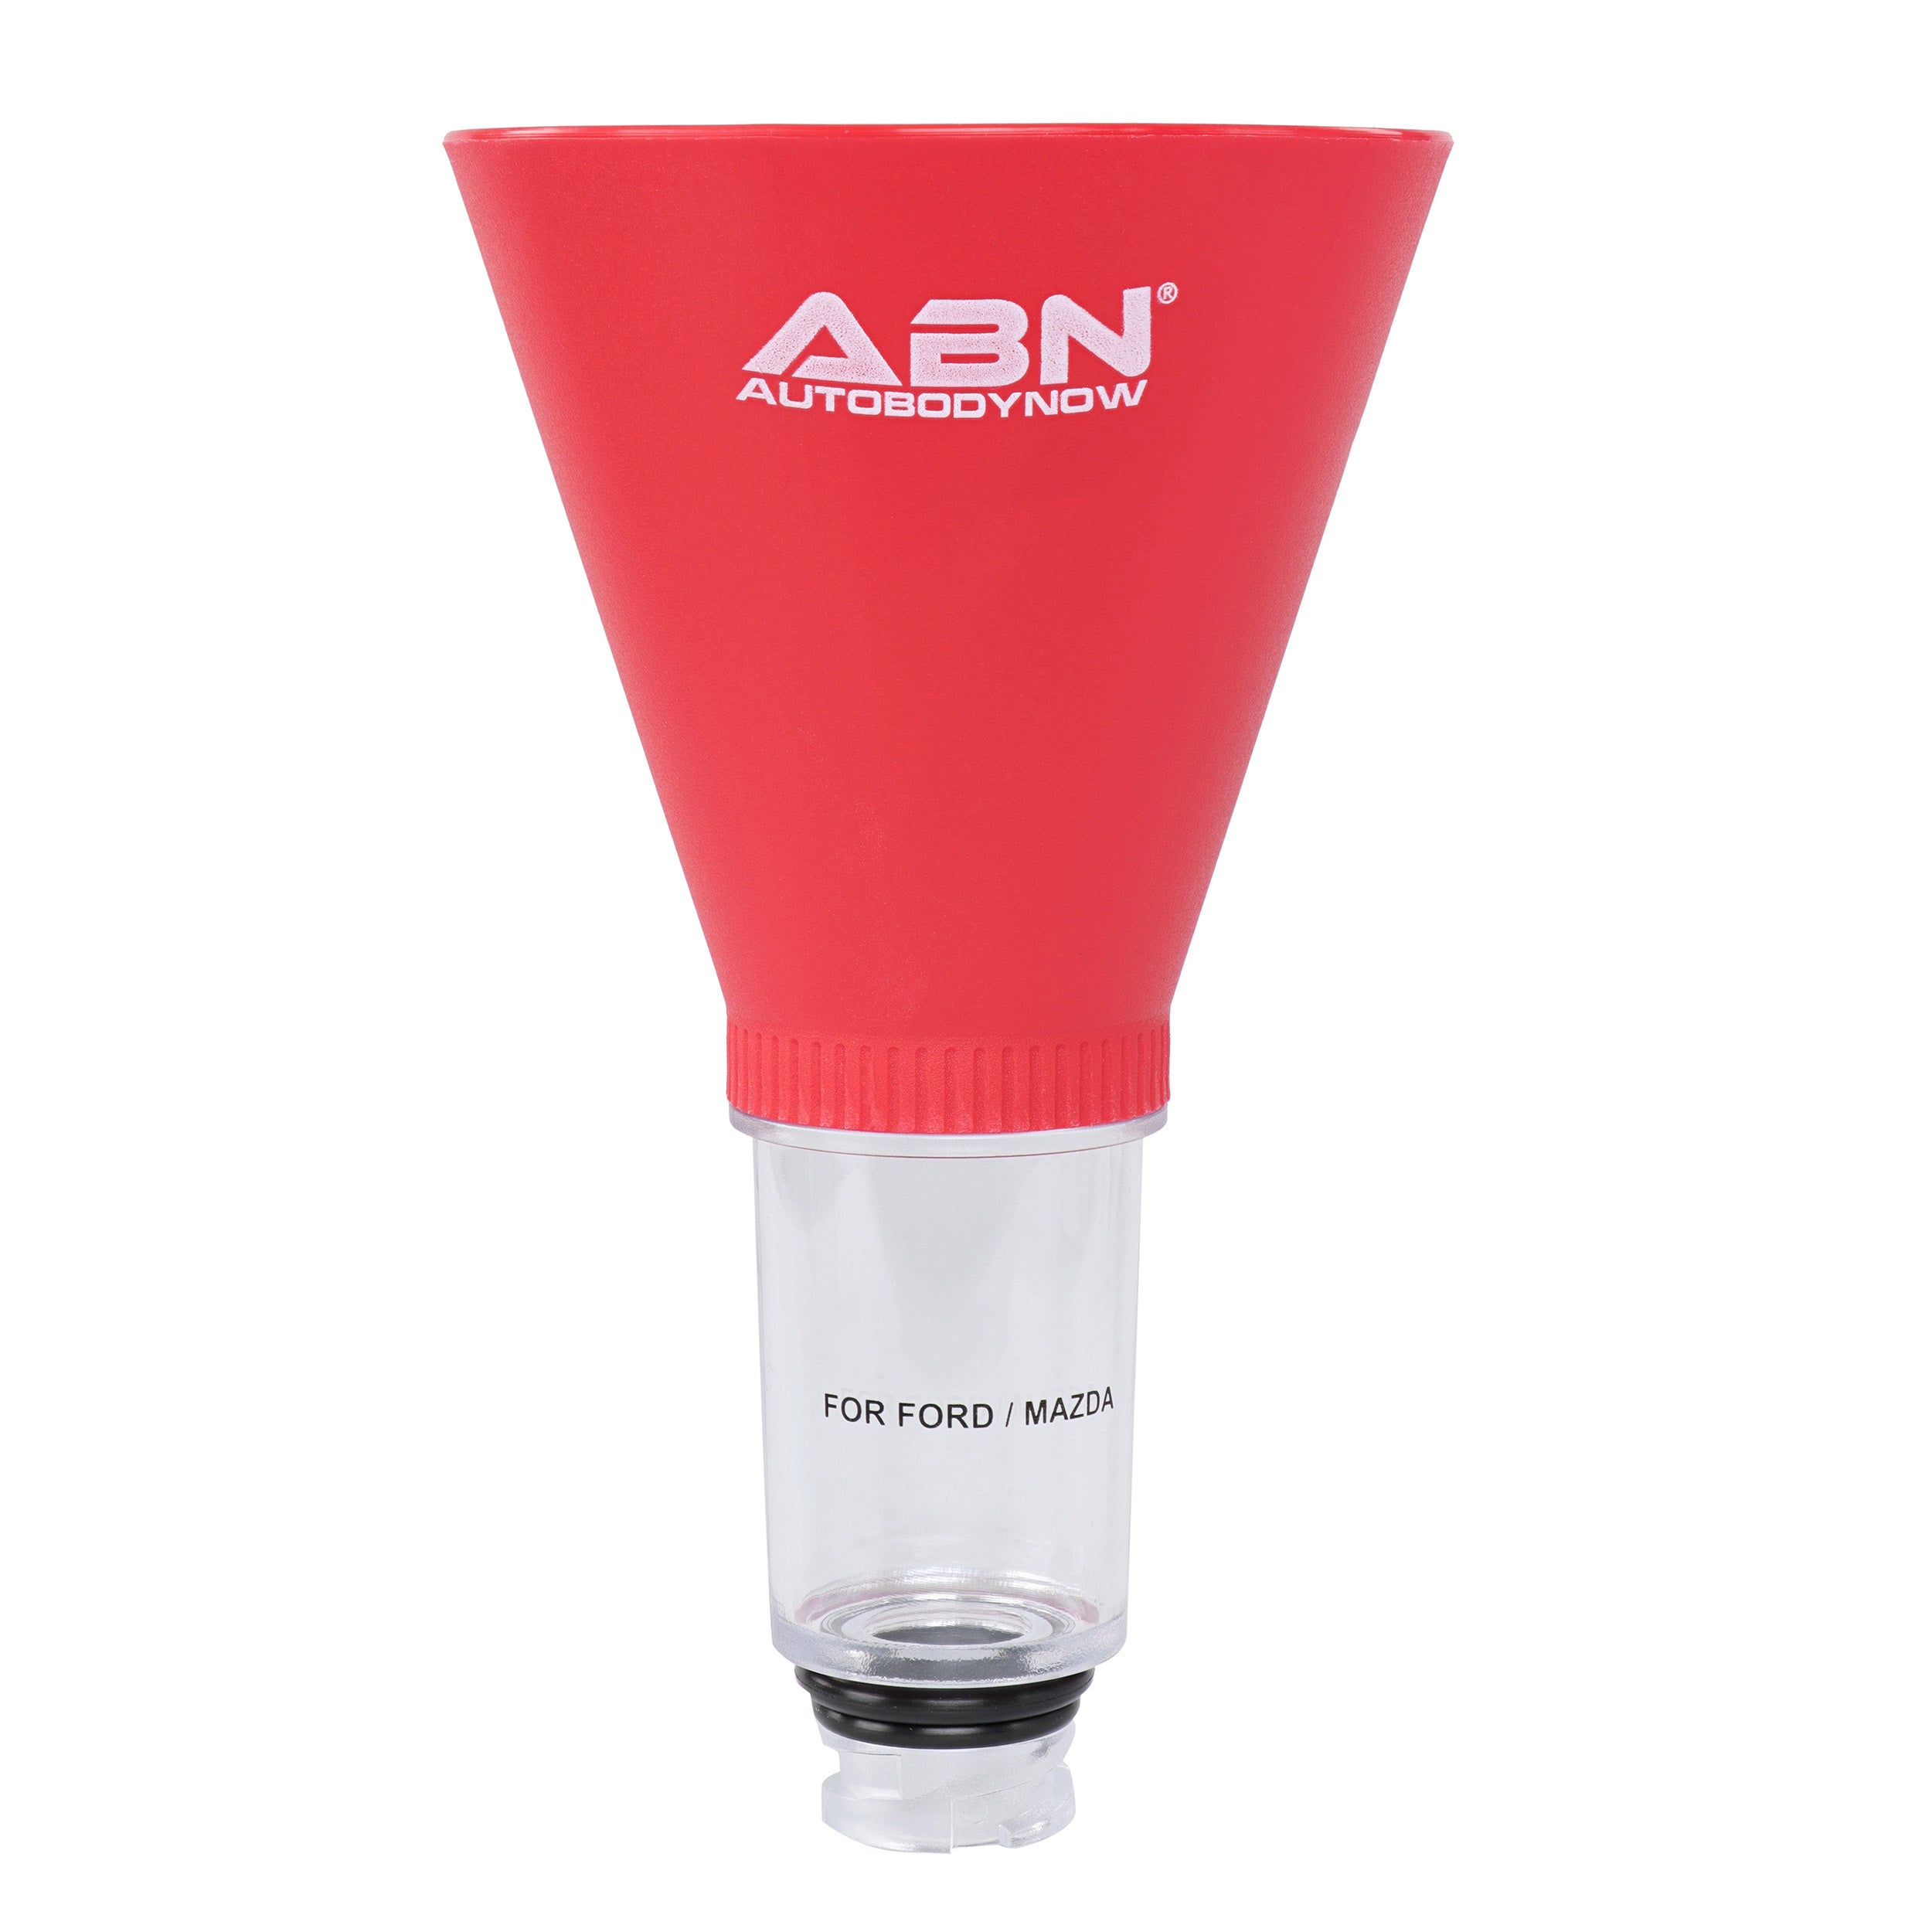 Automotive Funnel - Engine Oil Funnel Compatible with Ford and Mazda